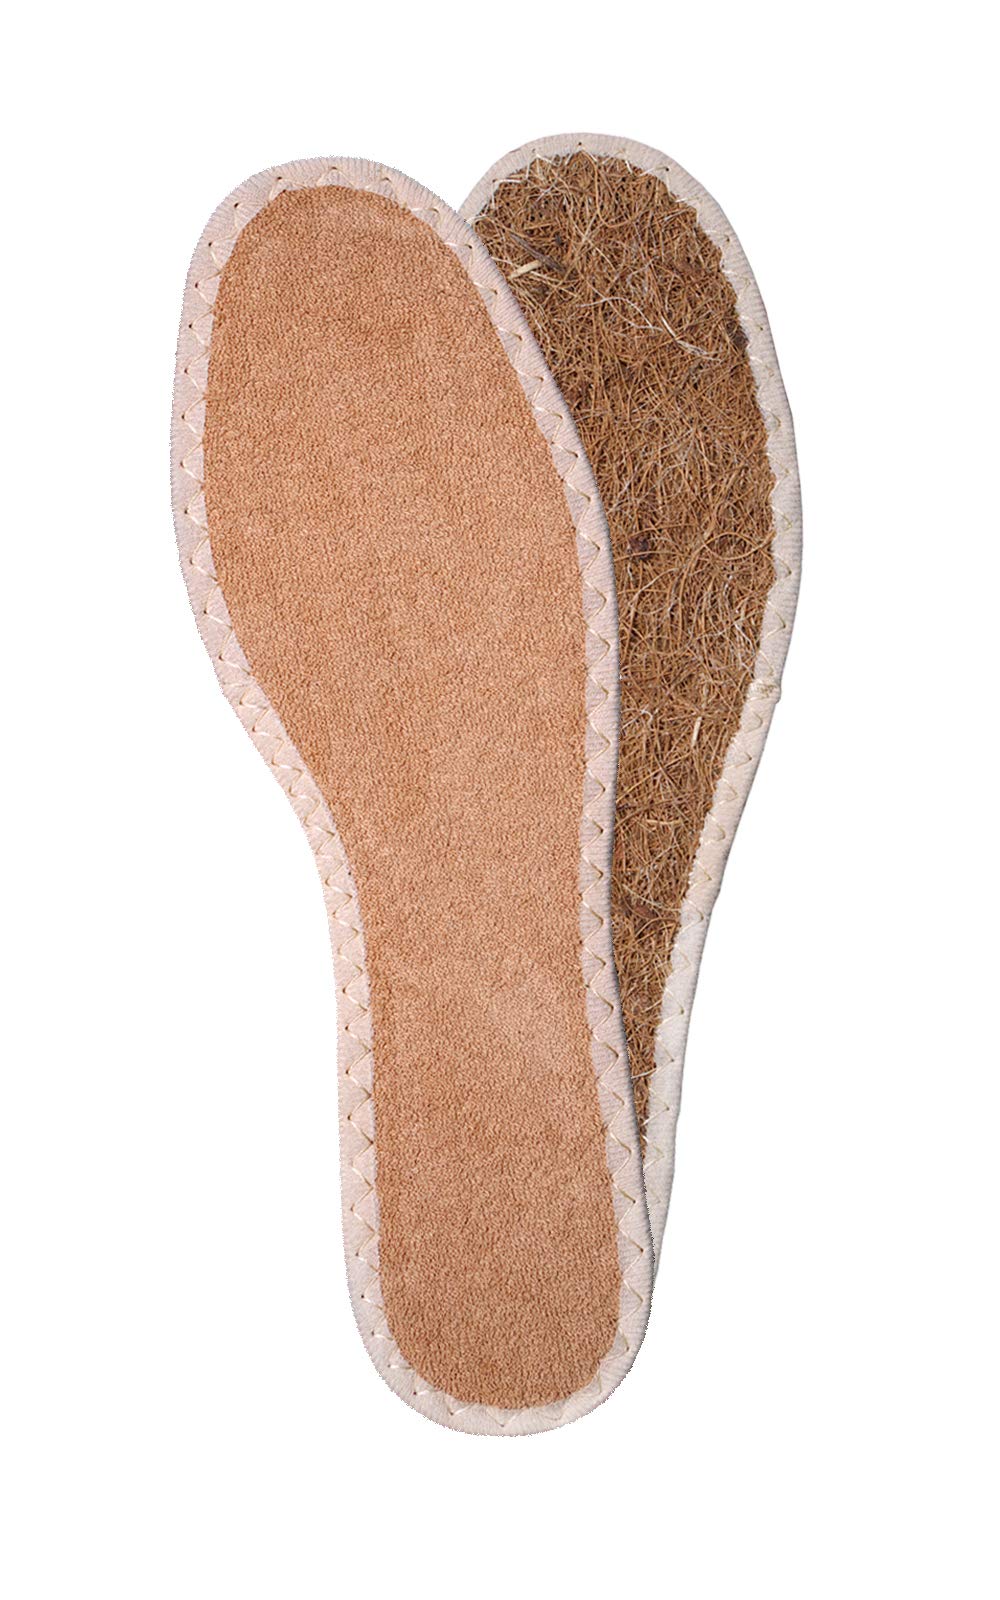 Shoe Insoles Inserts with Natural Coconut Fibres and Terry Cloth - MicroClimate for Your Feet - Eco (Men / 8 / 41 EUR / 7 UK)